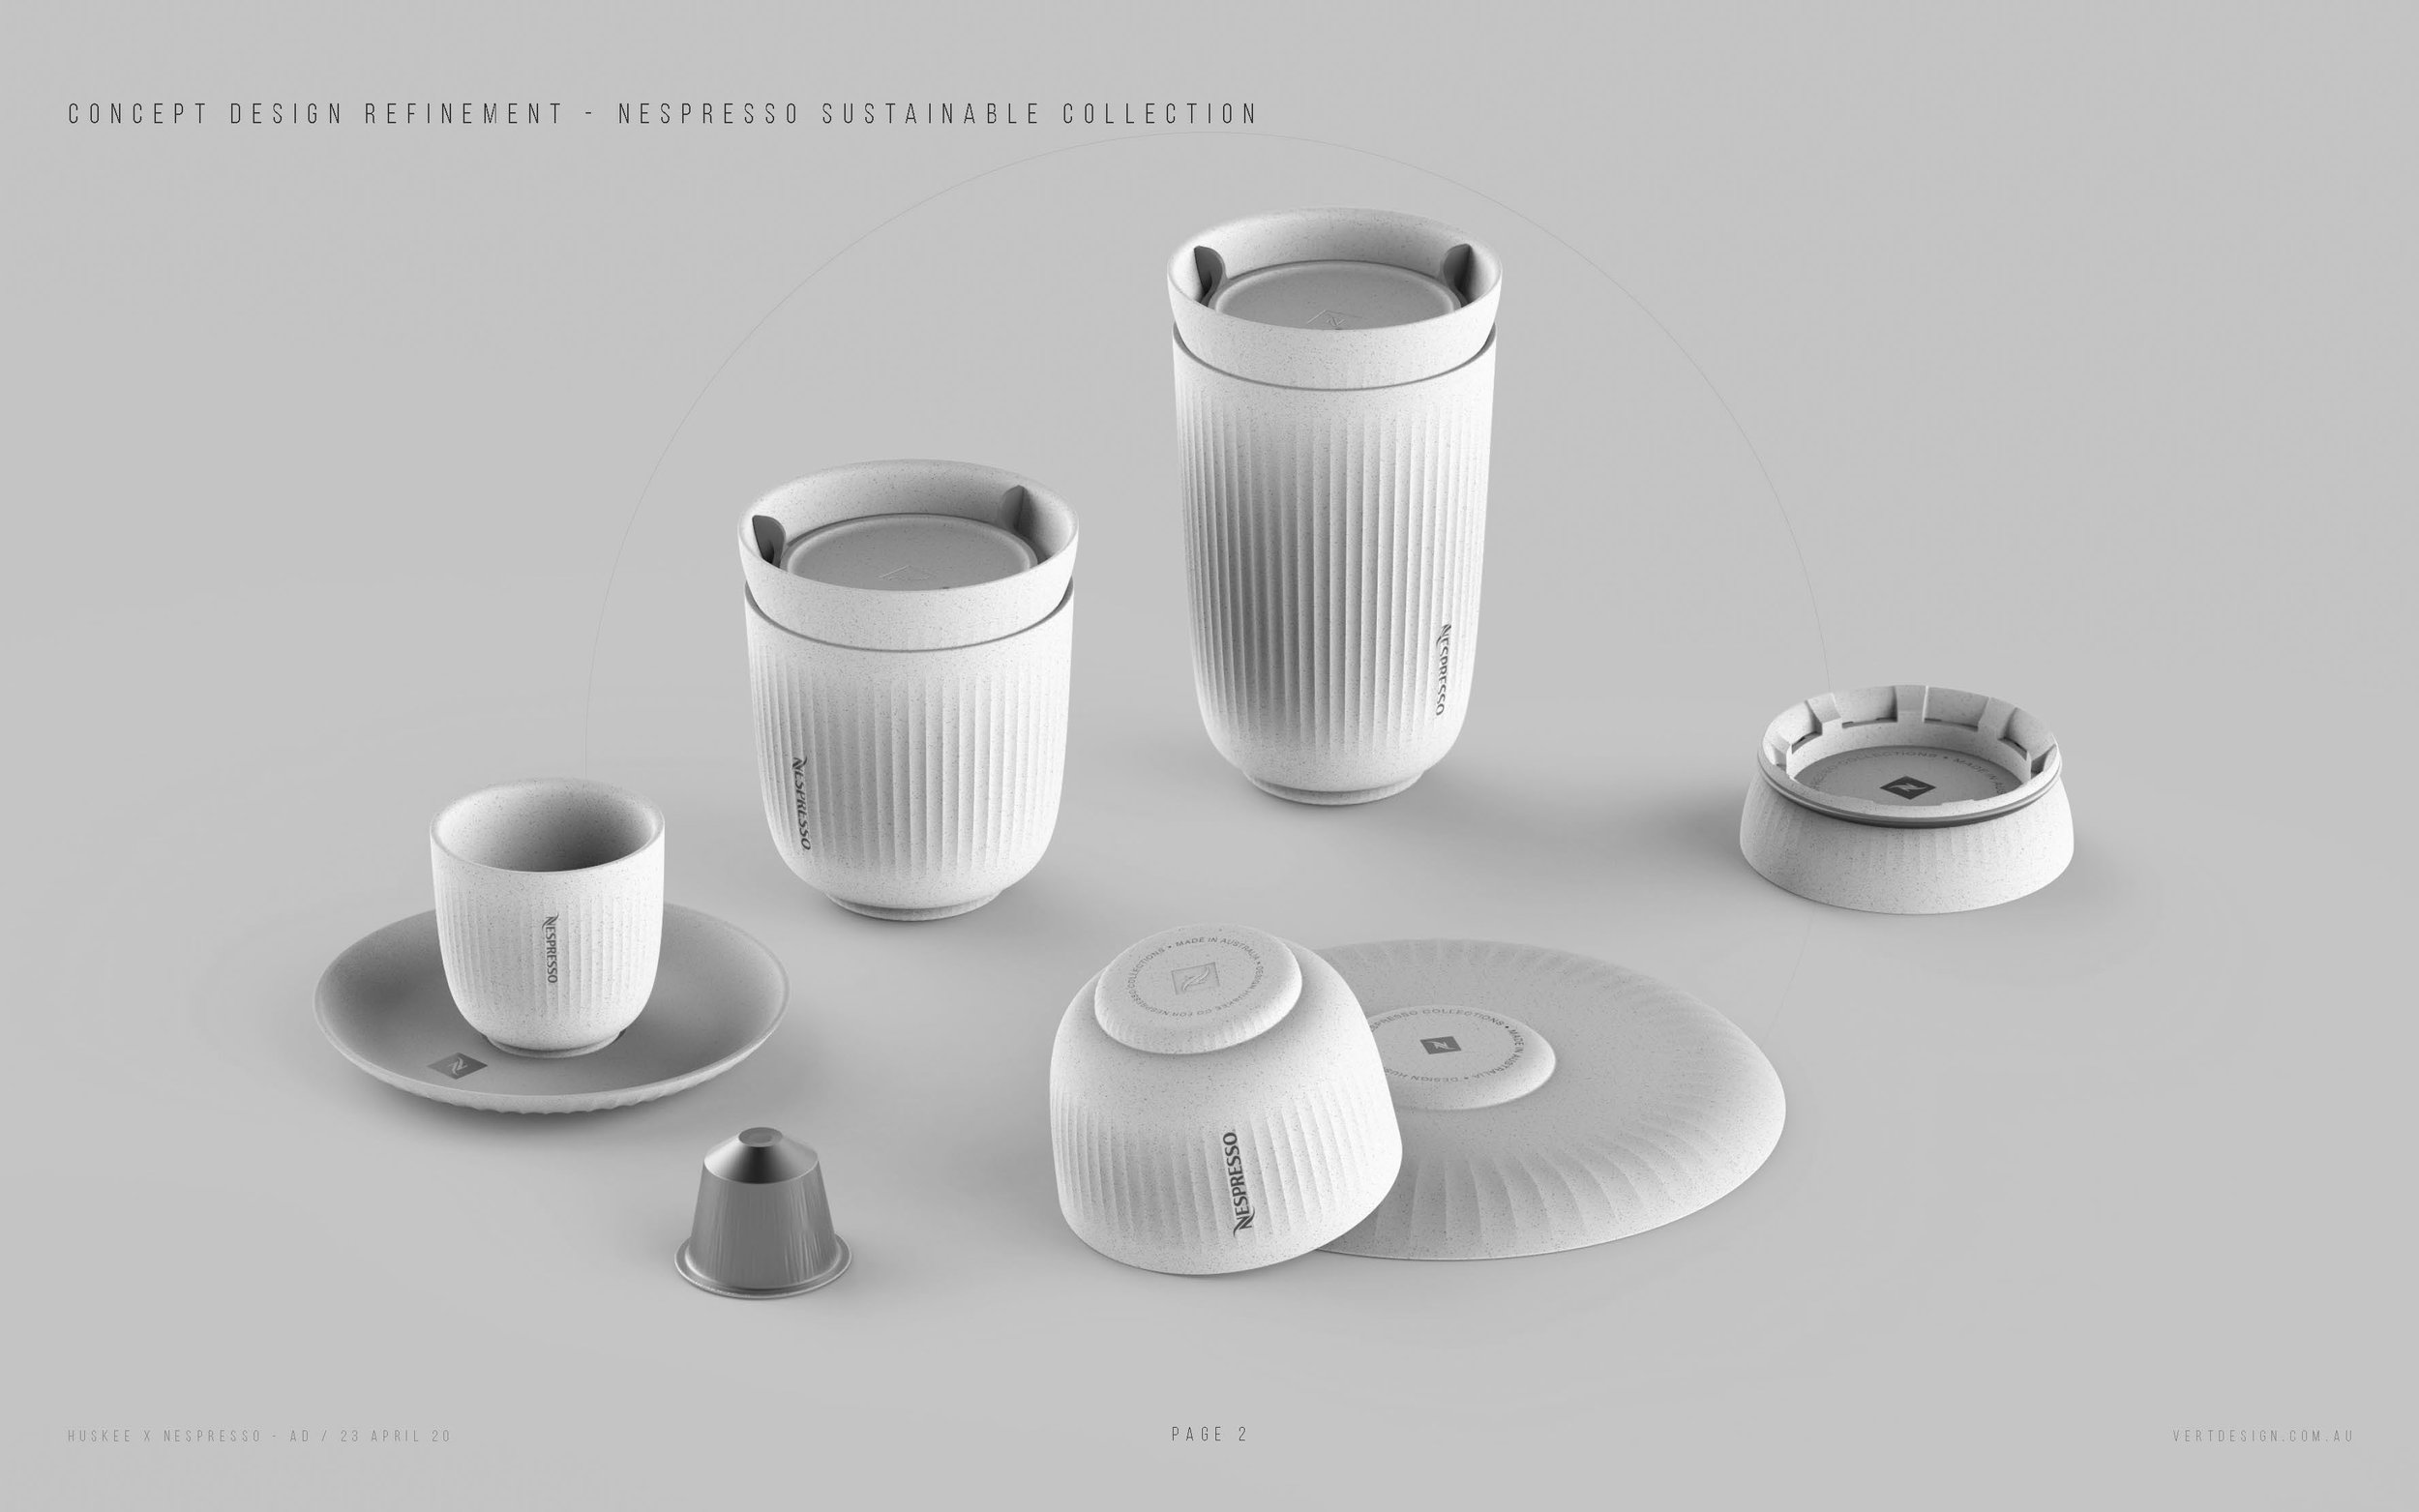 HUSKEE + NESPRESSO AD - SUSTAINABLE COLLECTION CONCEPT DESIGN REFINEMNT_R1_230420_Page_03.jpg